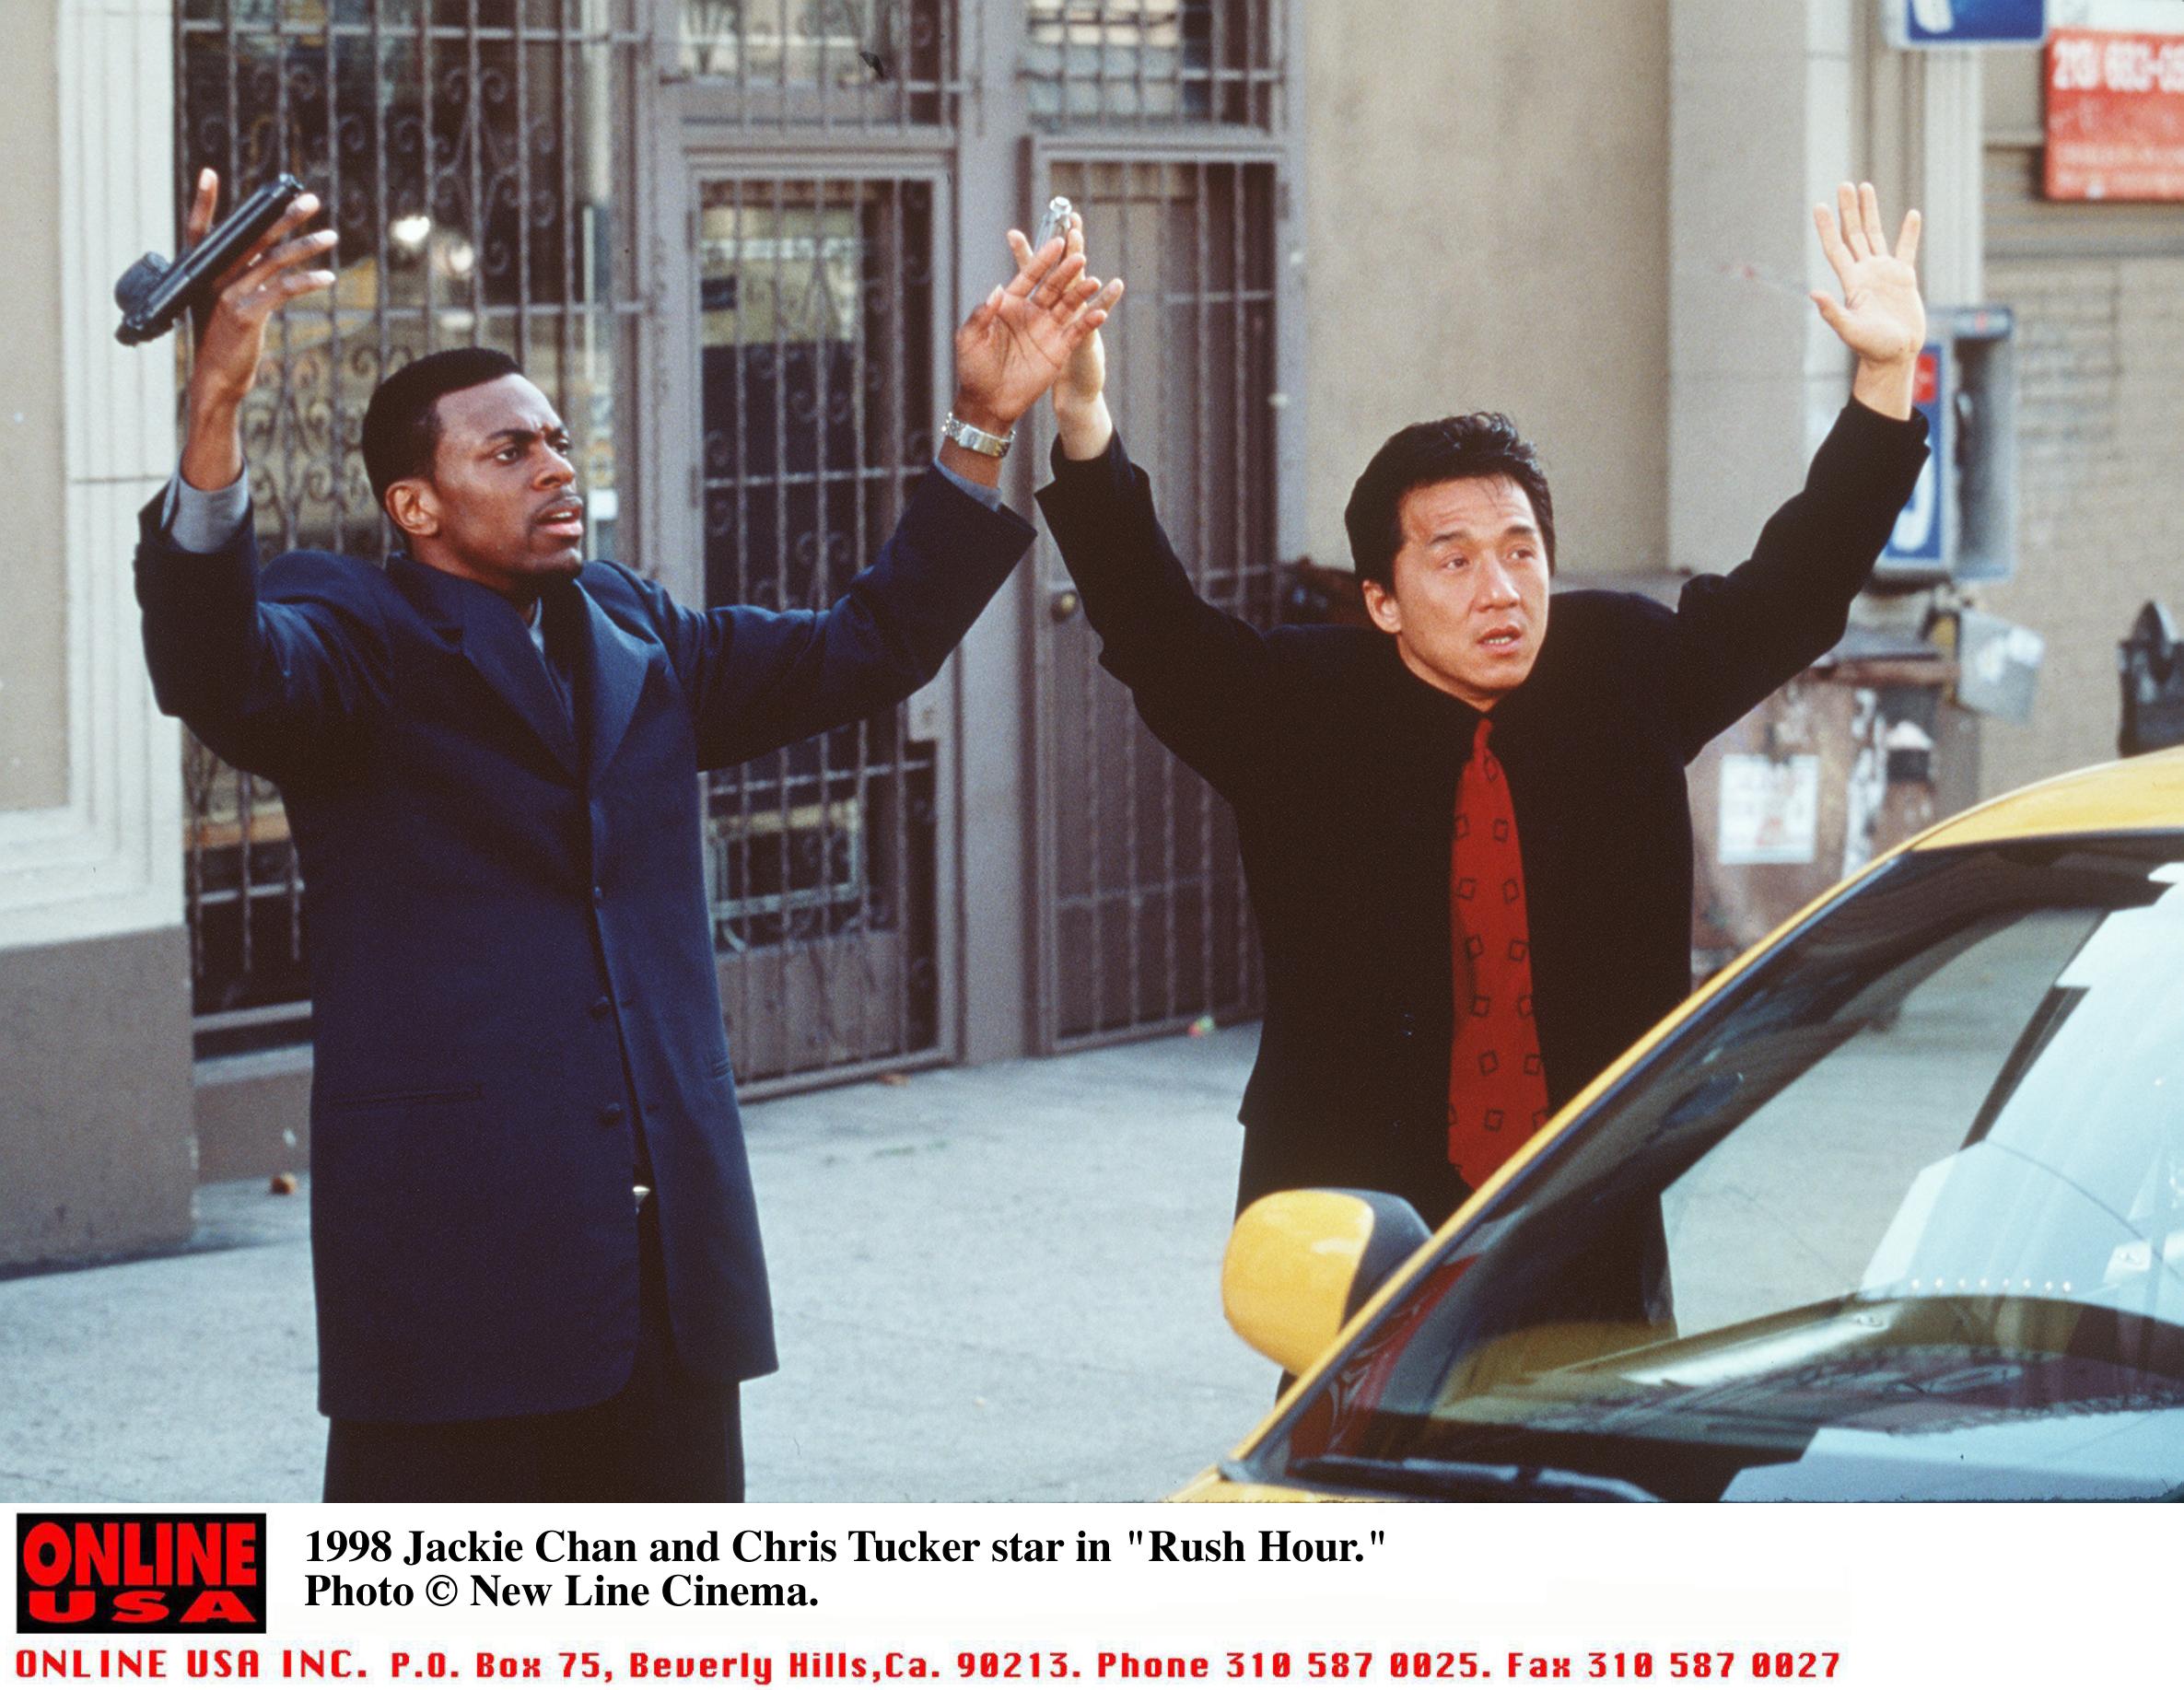 Rush Hour stars Chris Tucker and Jackie Chan both put their hands up